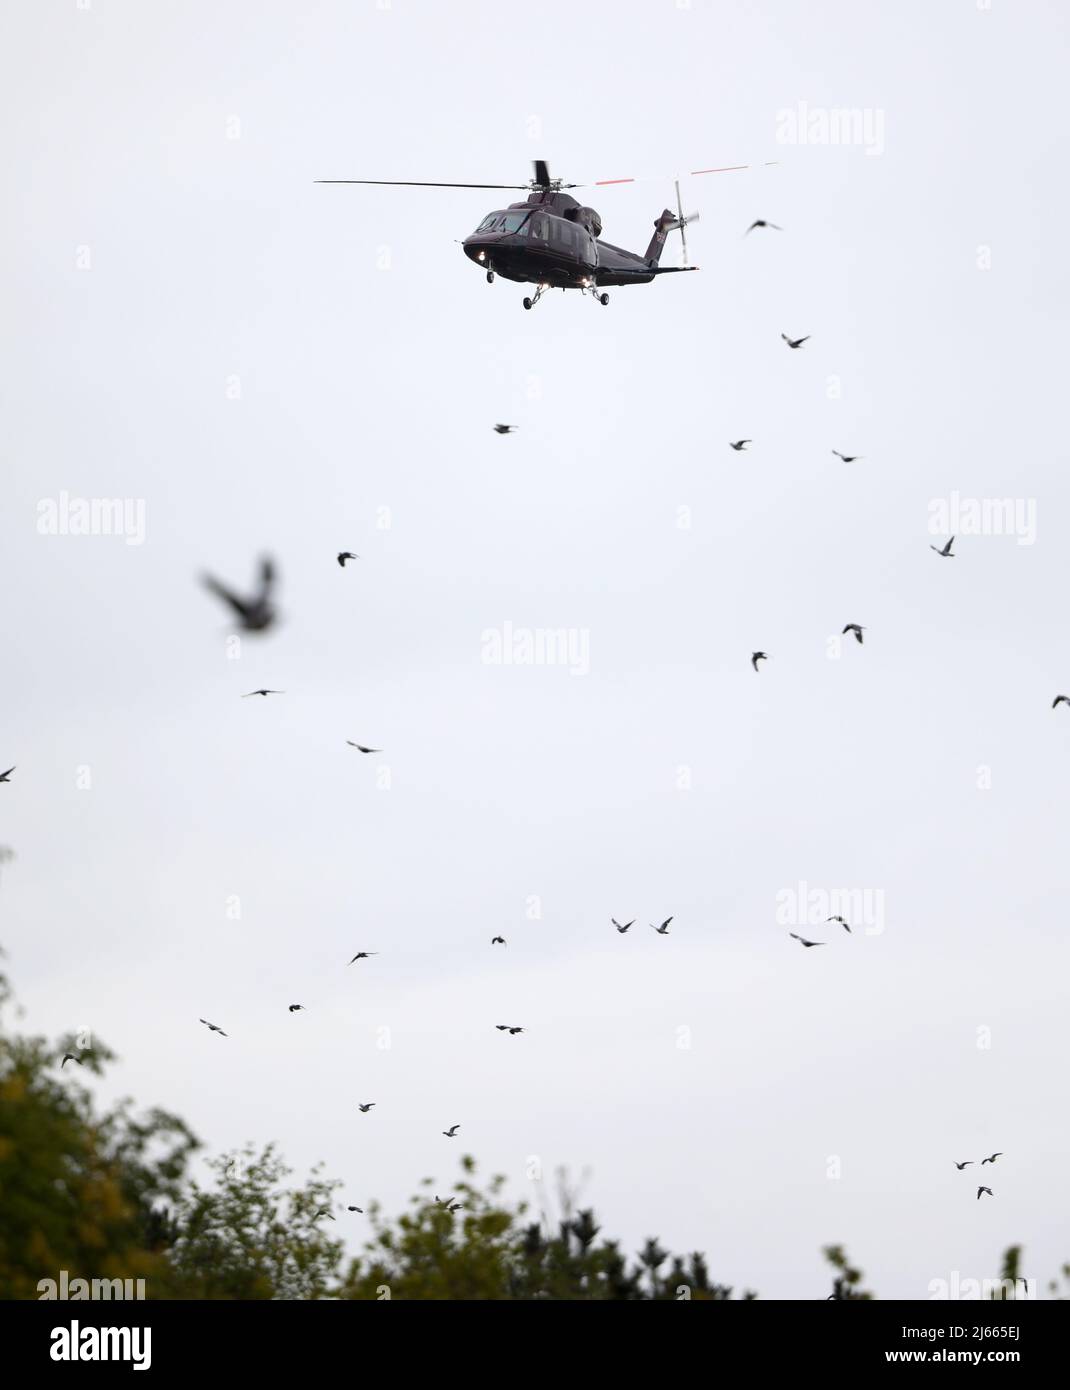 Sandringham, UK. 27th Apr, 2022. Birds scatter as the helicopter arrives to collect The Queen. Queen Elizabeth II returns to Windsor after she celebrated her 96th birthday, on the Sandringham Estate. The Queen had a short break of about a week on the Sandringham Estate before a helicopter flight back to Windsor Castle today. Queen Elizabeth II, Sandringham, Norfolk, UK, on April 27, 2022 Credit: Paul Marriott/Alamy Live News Stock Photo